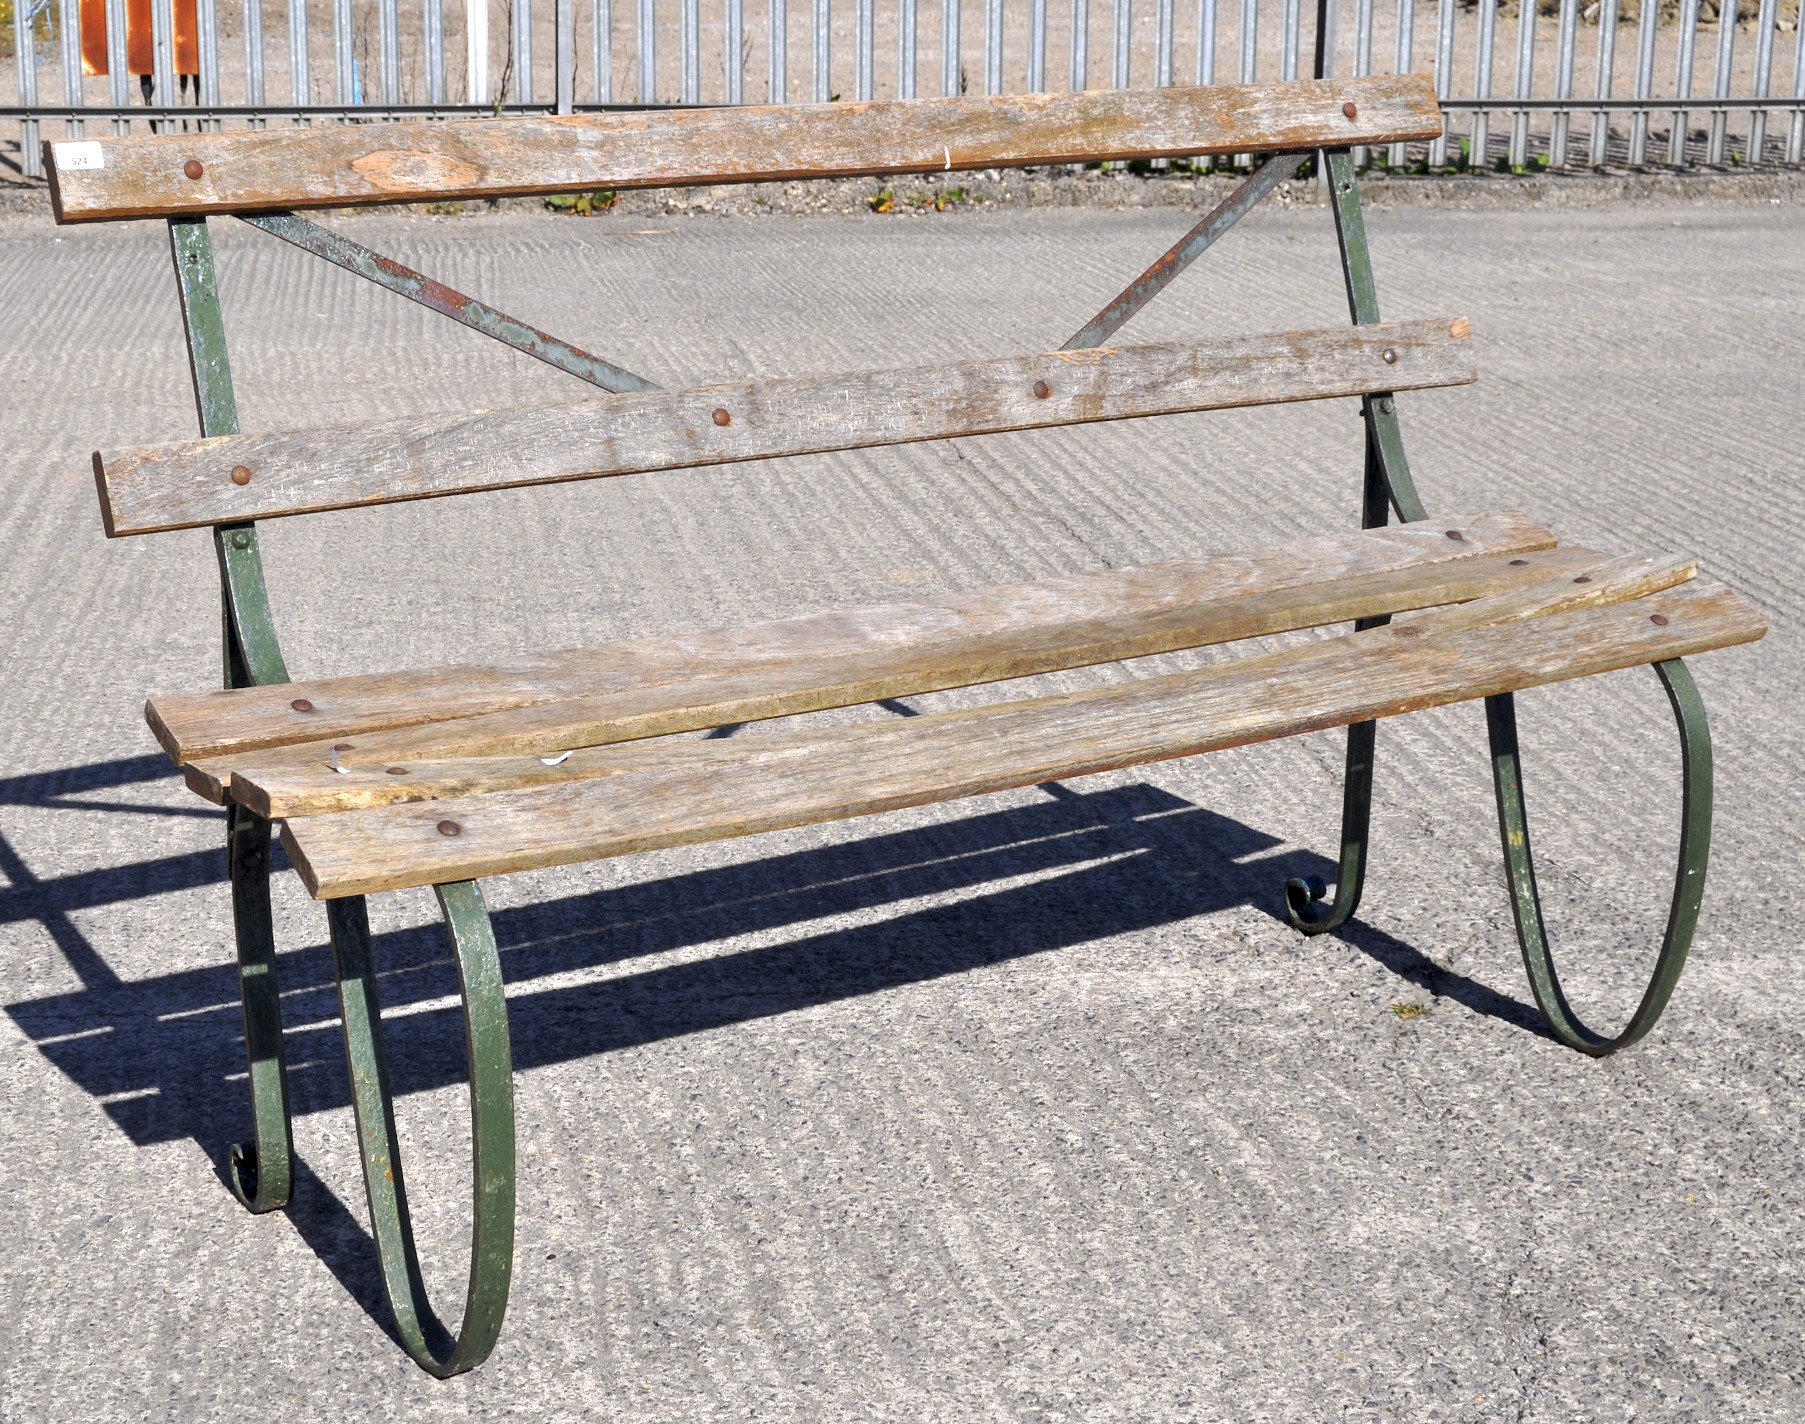 A late 19th century/early 20th century wrought iron bench,